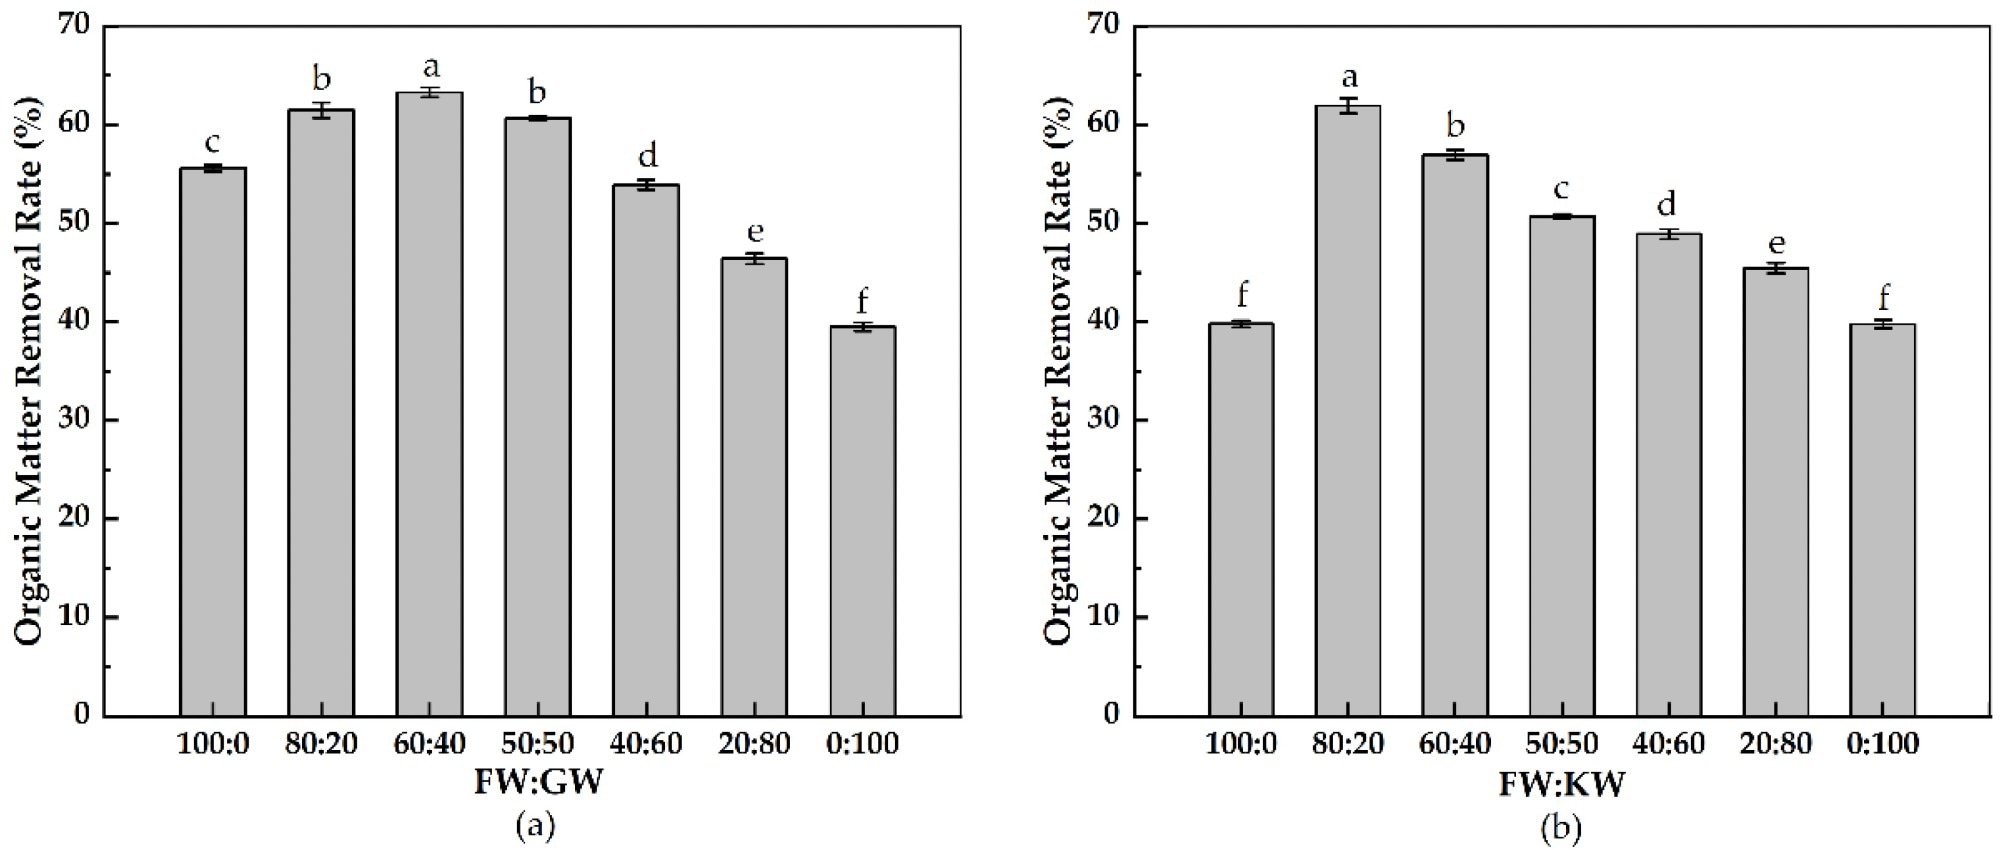 Organic matter removal rates for the thermophilic dry anaerobic co-fermentation of (a) FW + GW and (b) FW + KW. Letters indicate significant differences between the different mixing ratios (p < 0.05).